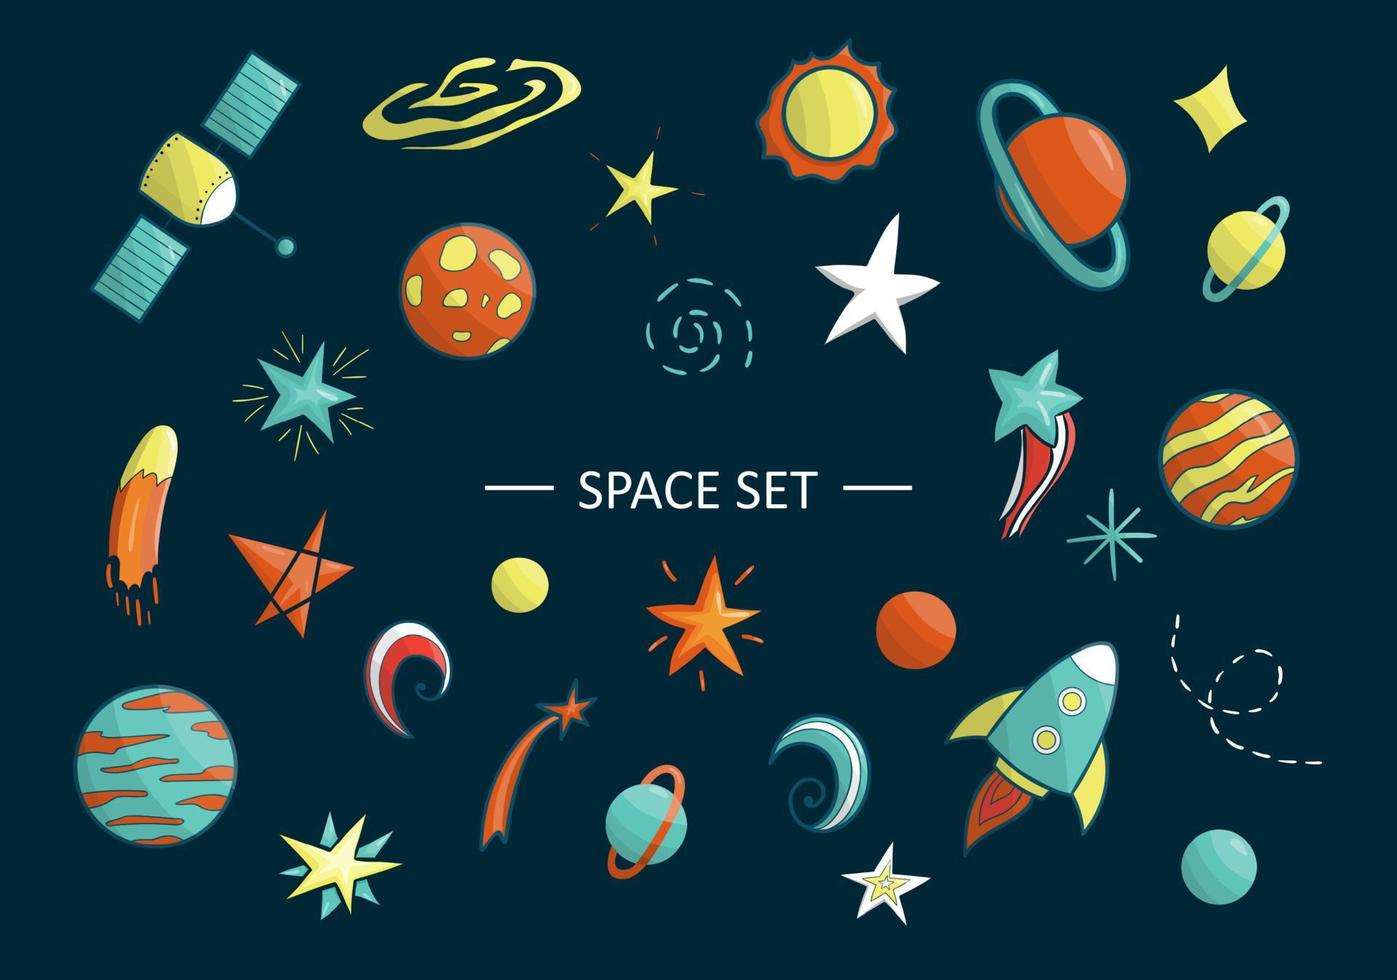 Vector set of space objects. Illustration of space clip art. Bright planet, rocket, star, ufo, galaxy, moon,   spaceship, sun in cartoon style. Good for children posters.